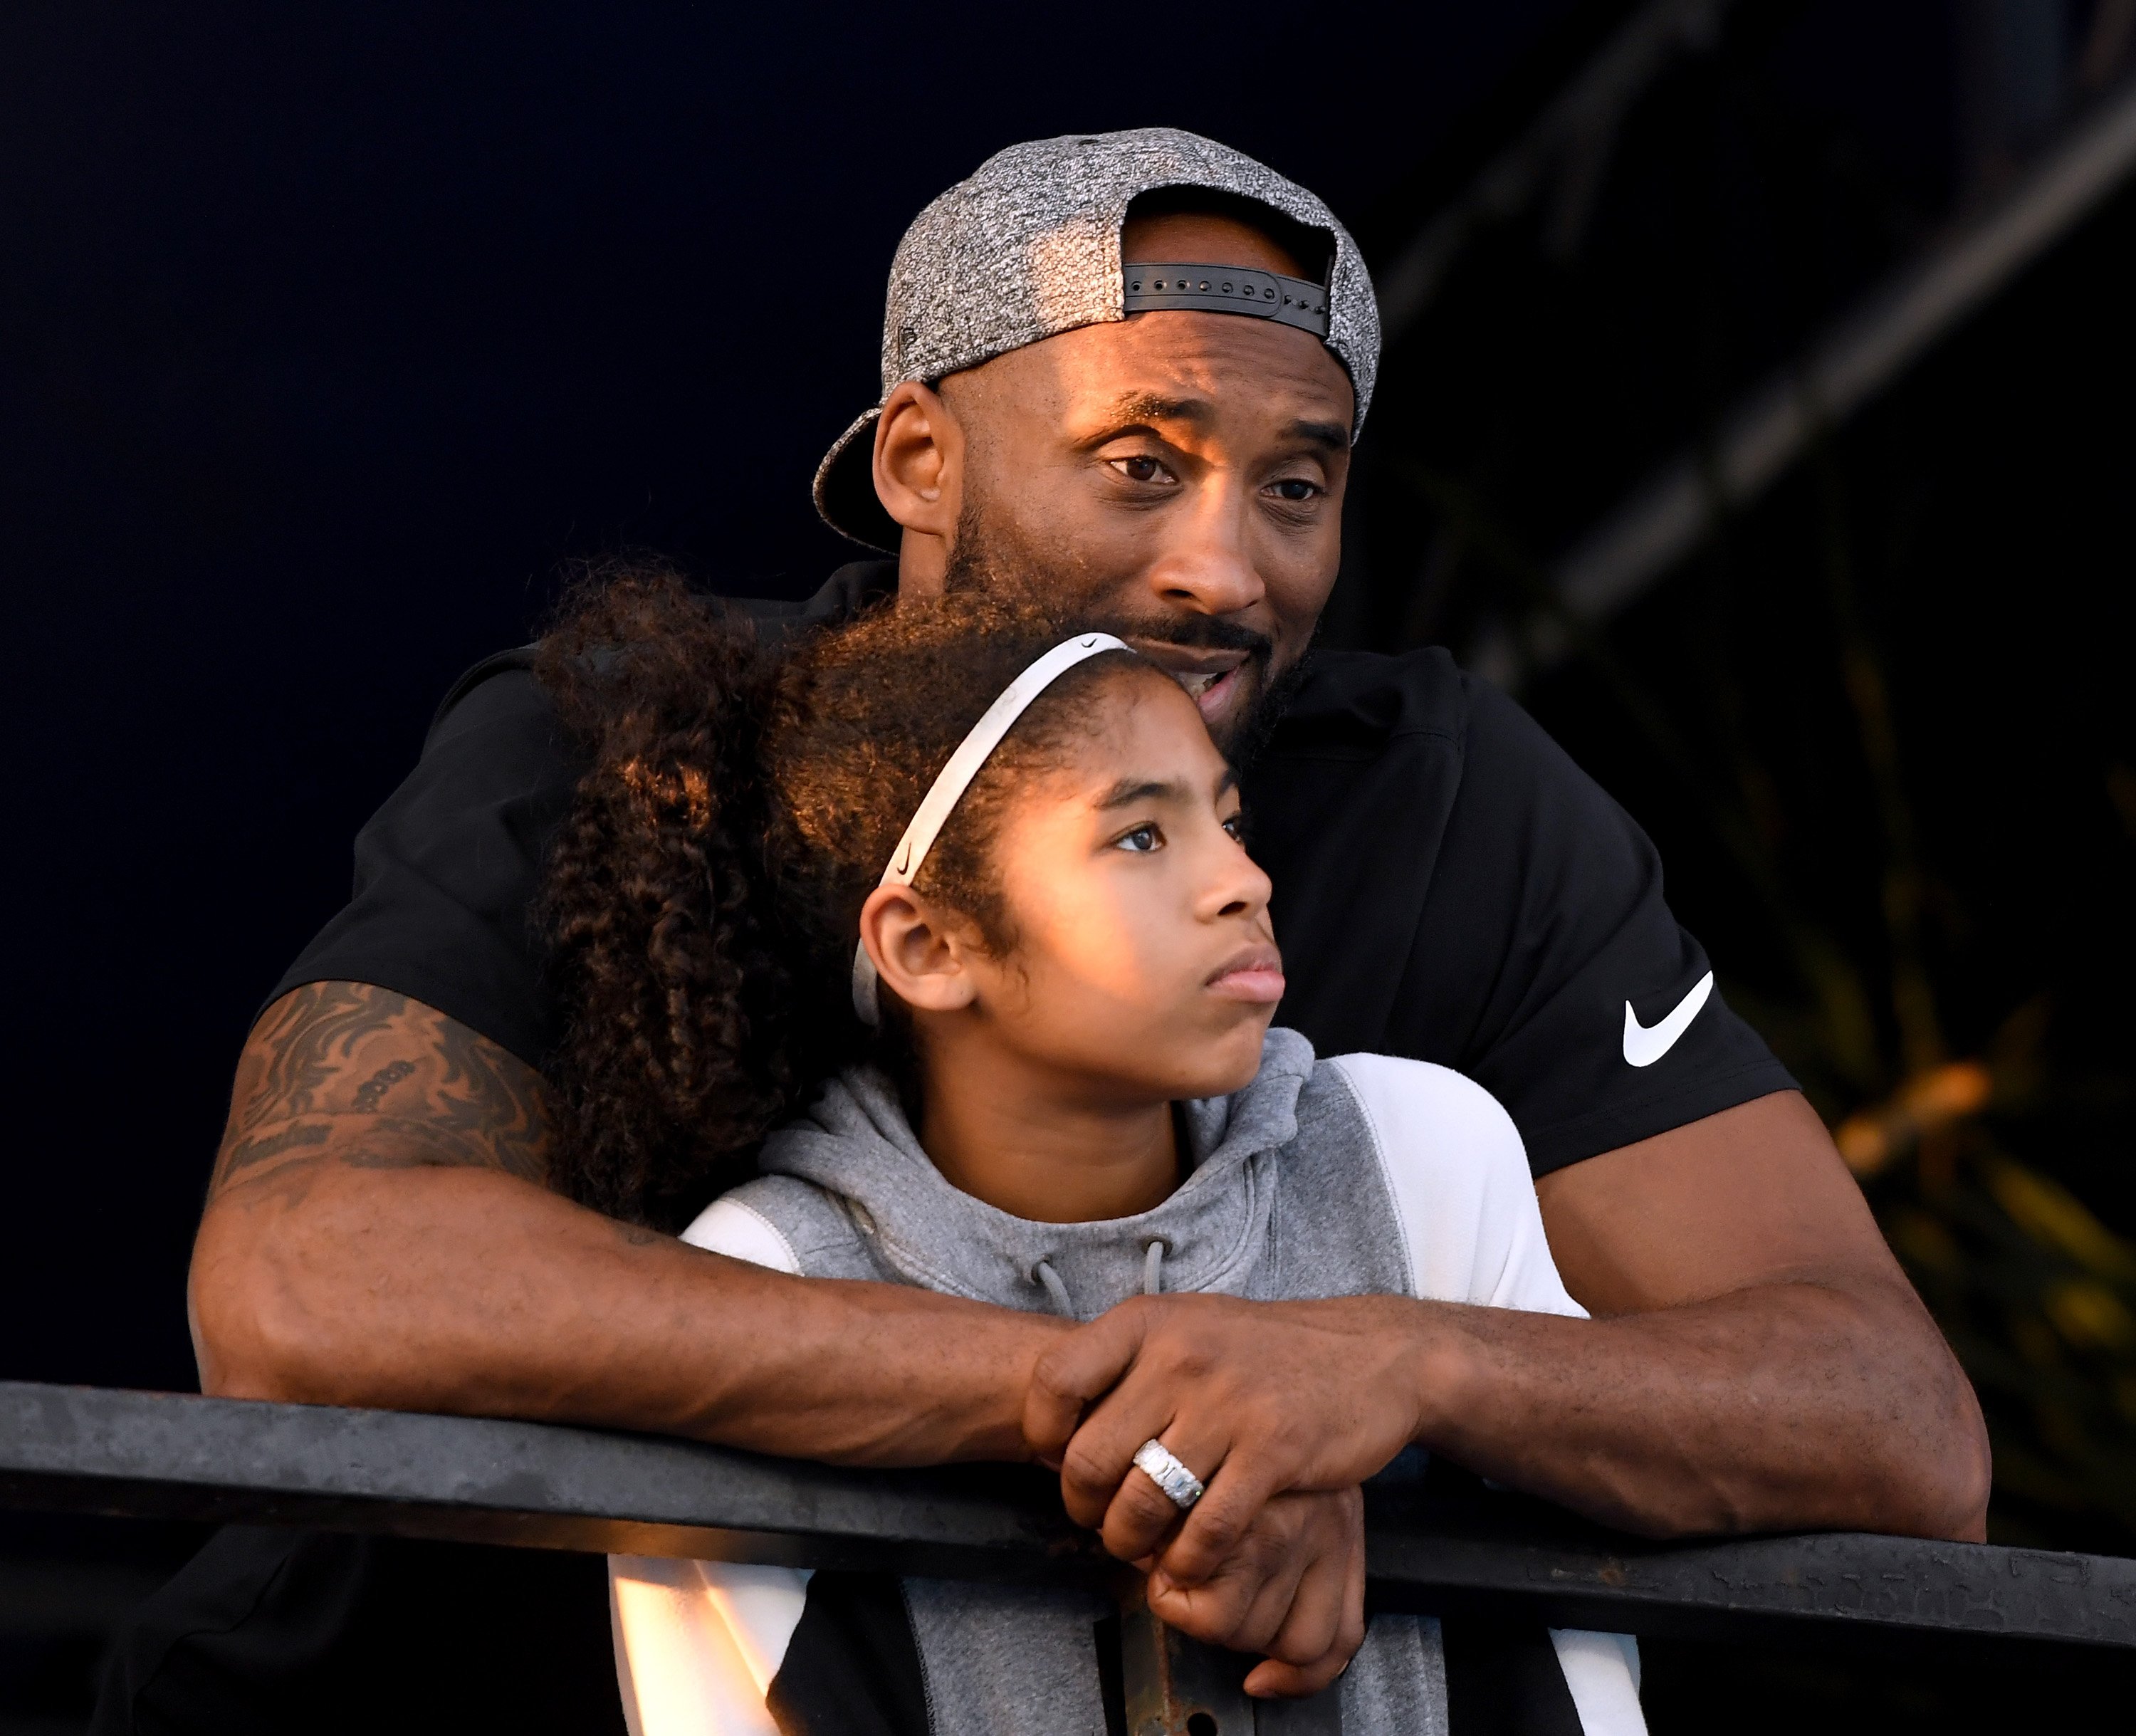 Kobe Bryant and daughter Gianna Bryant watch during day 2 of the Phillips 66 National Swimming Championships on July 26, 2018 in California | Photo: Getty Images